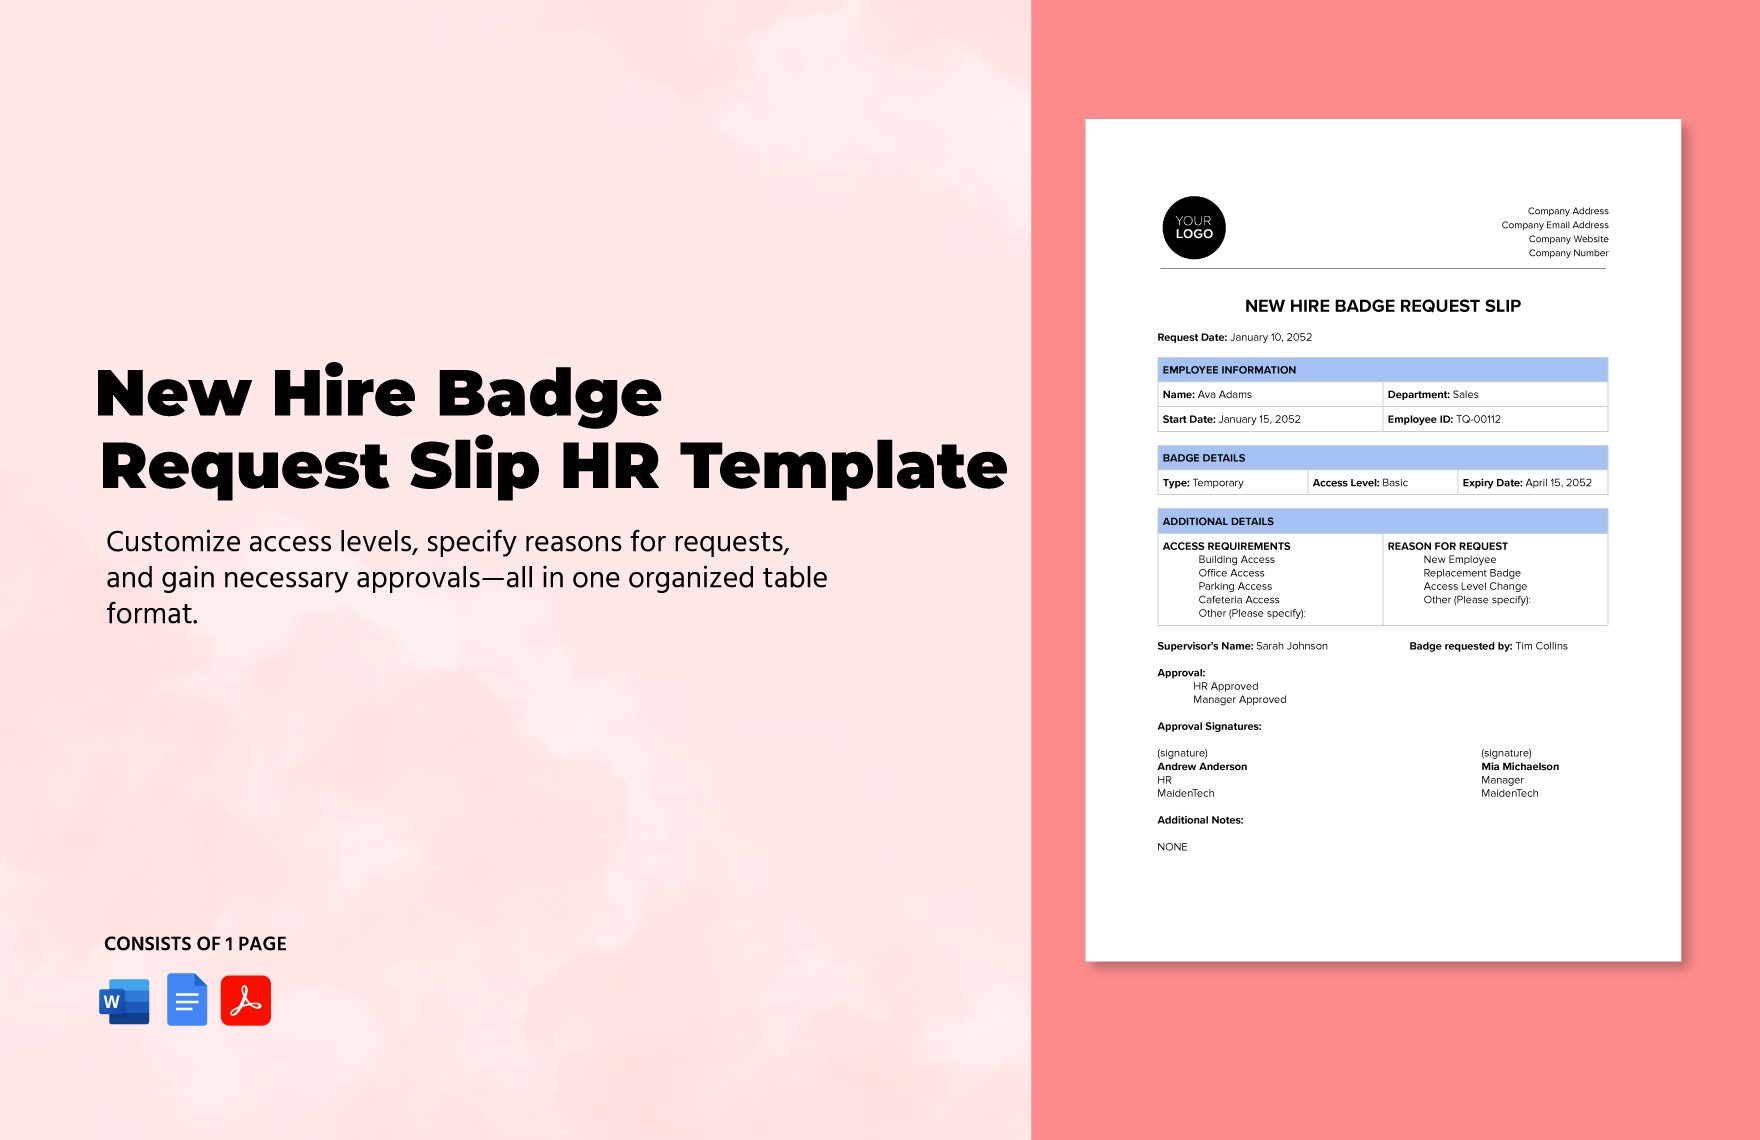 New Hire Badge Request Slip HR Template in Word, Google Docs, PDF